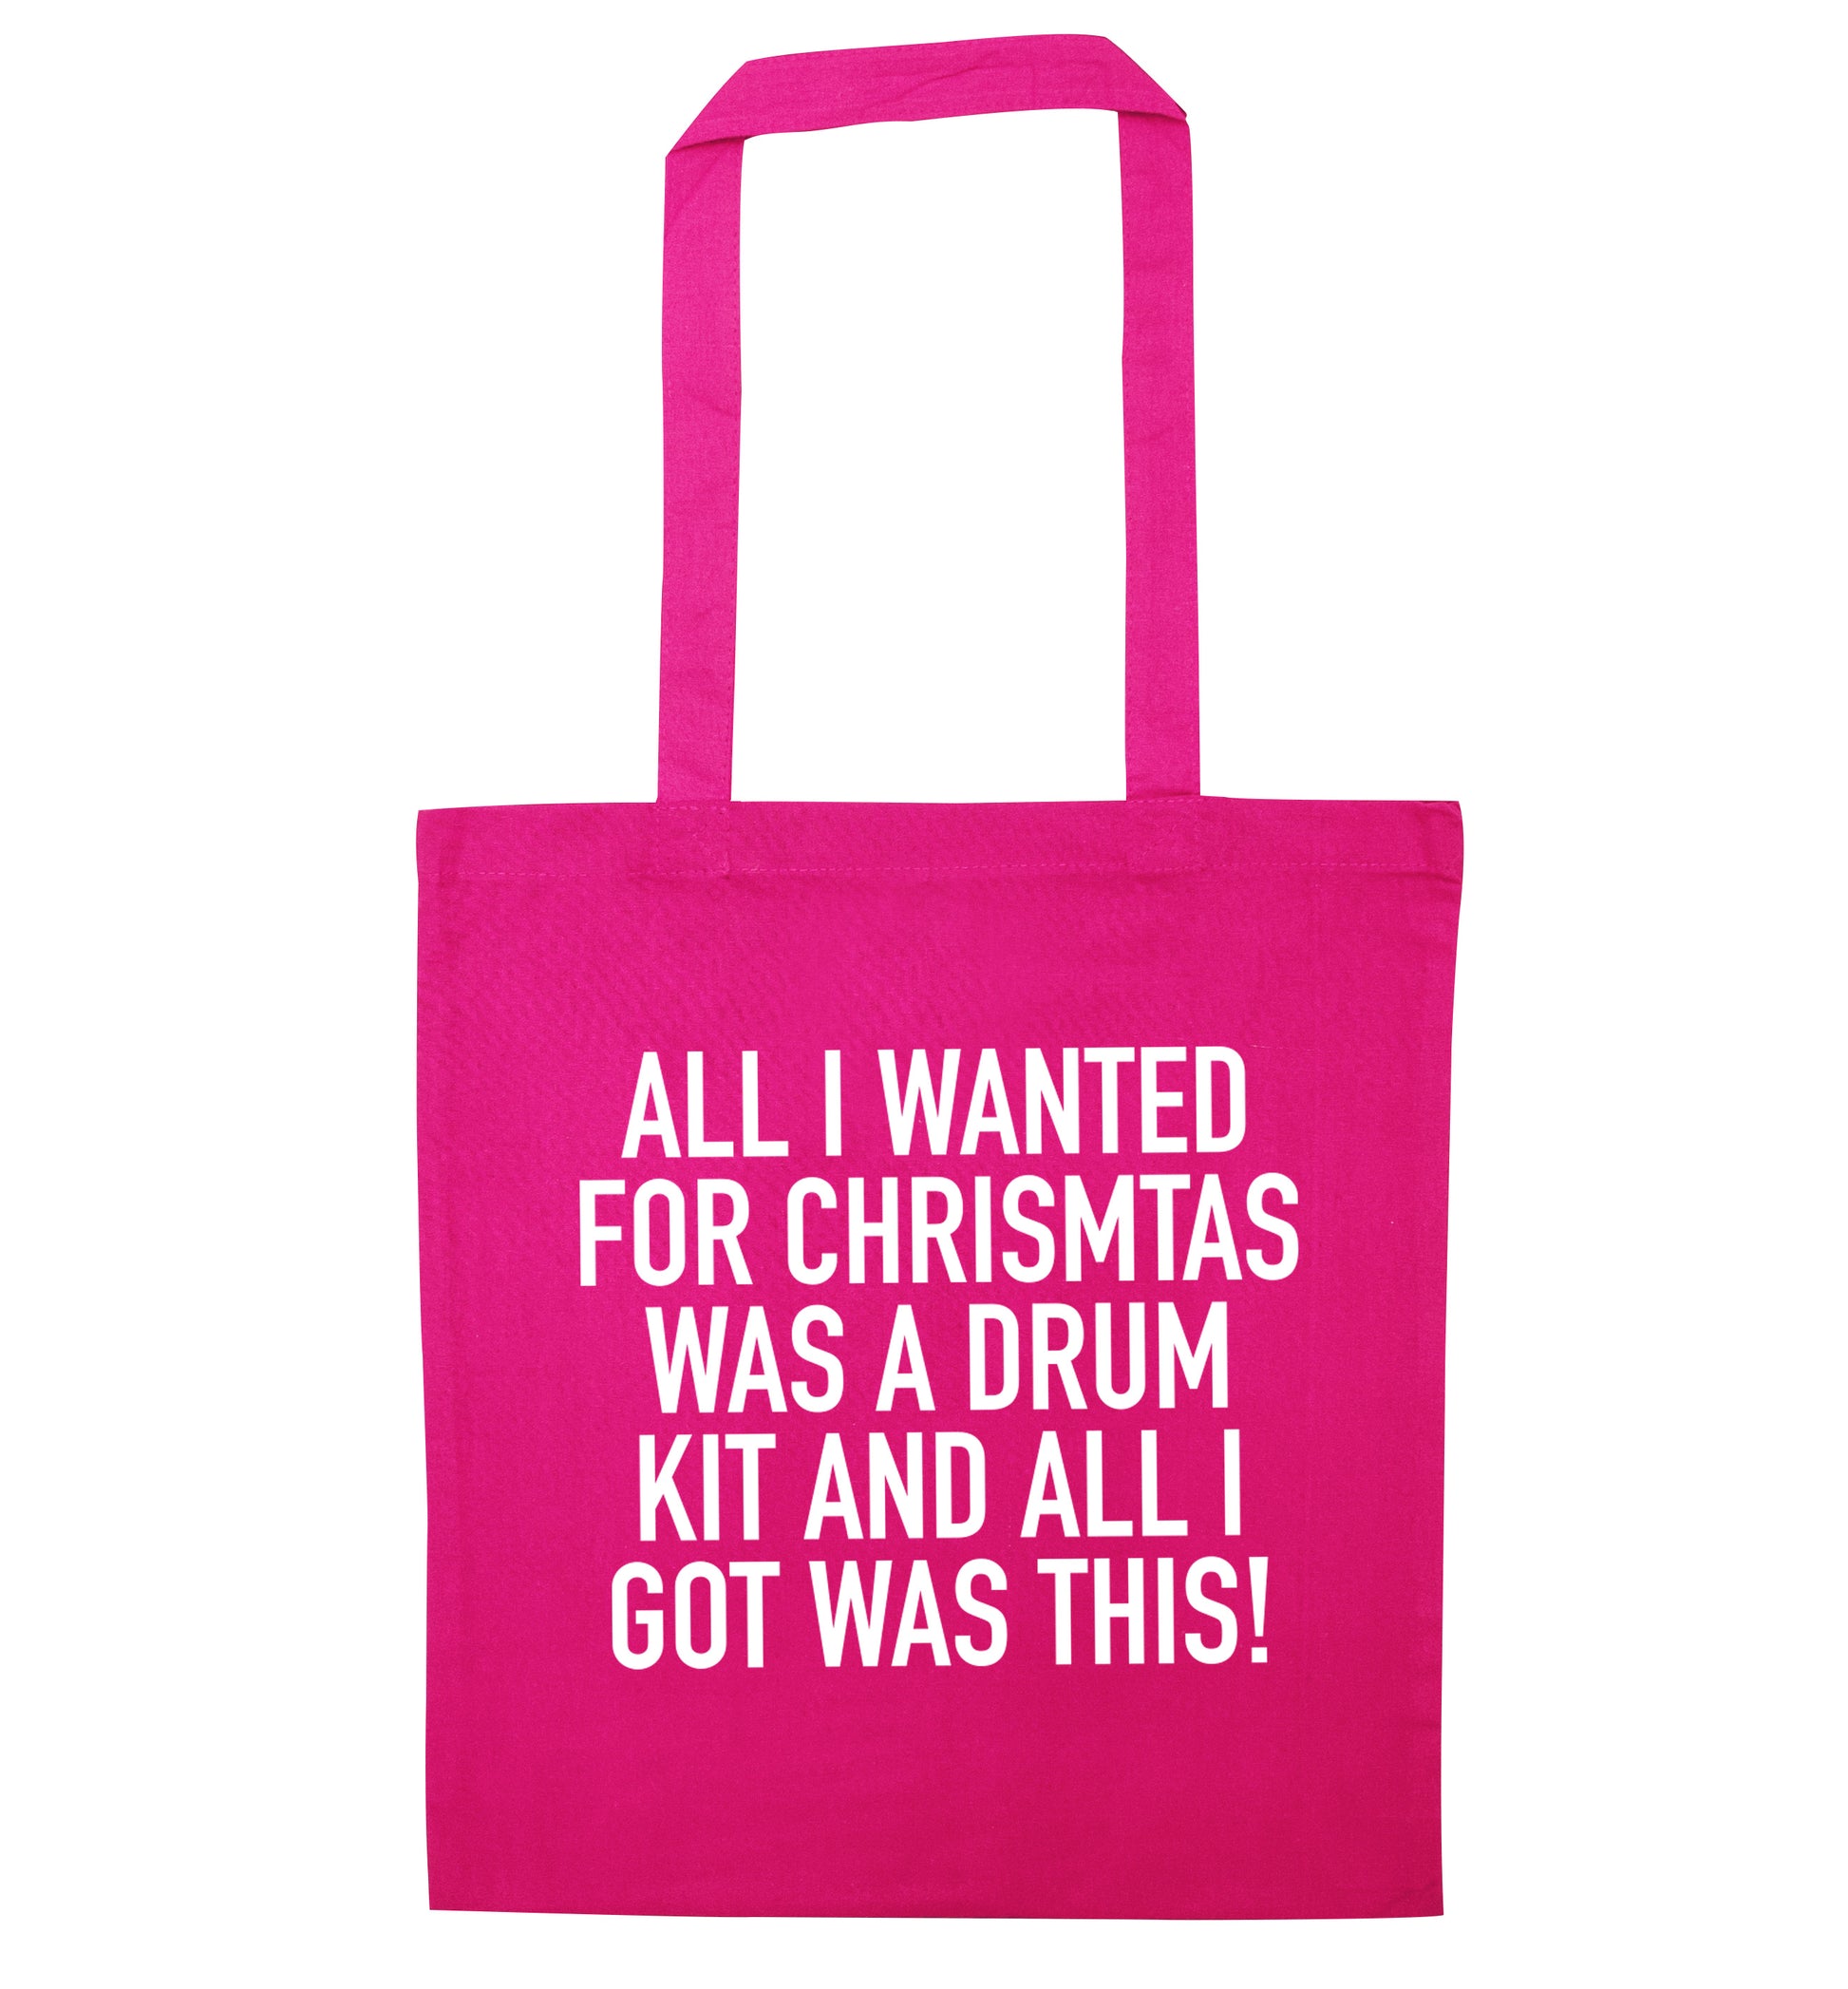 All I wanted for Christmas was a drum kit and all I got was this! pink tote bag